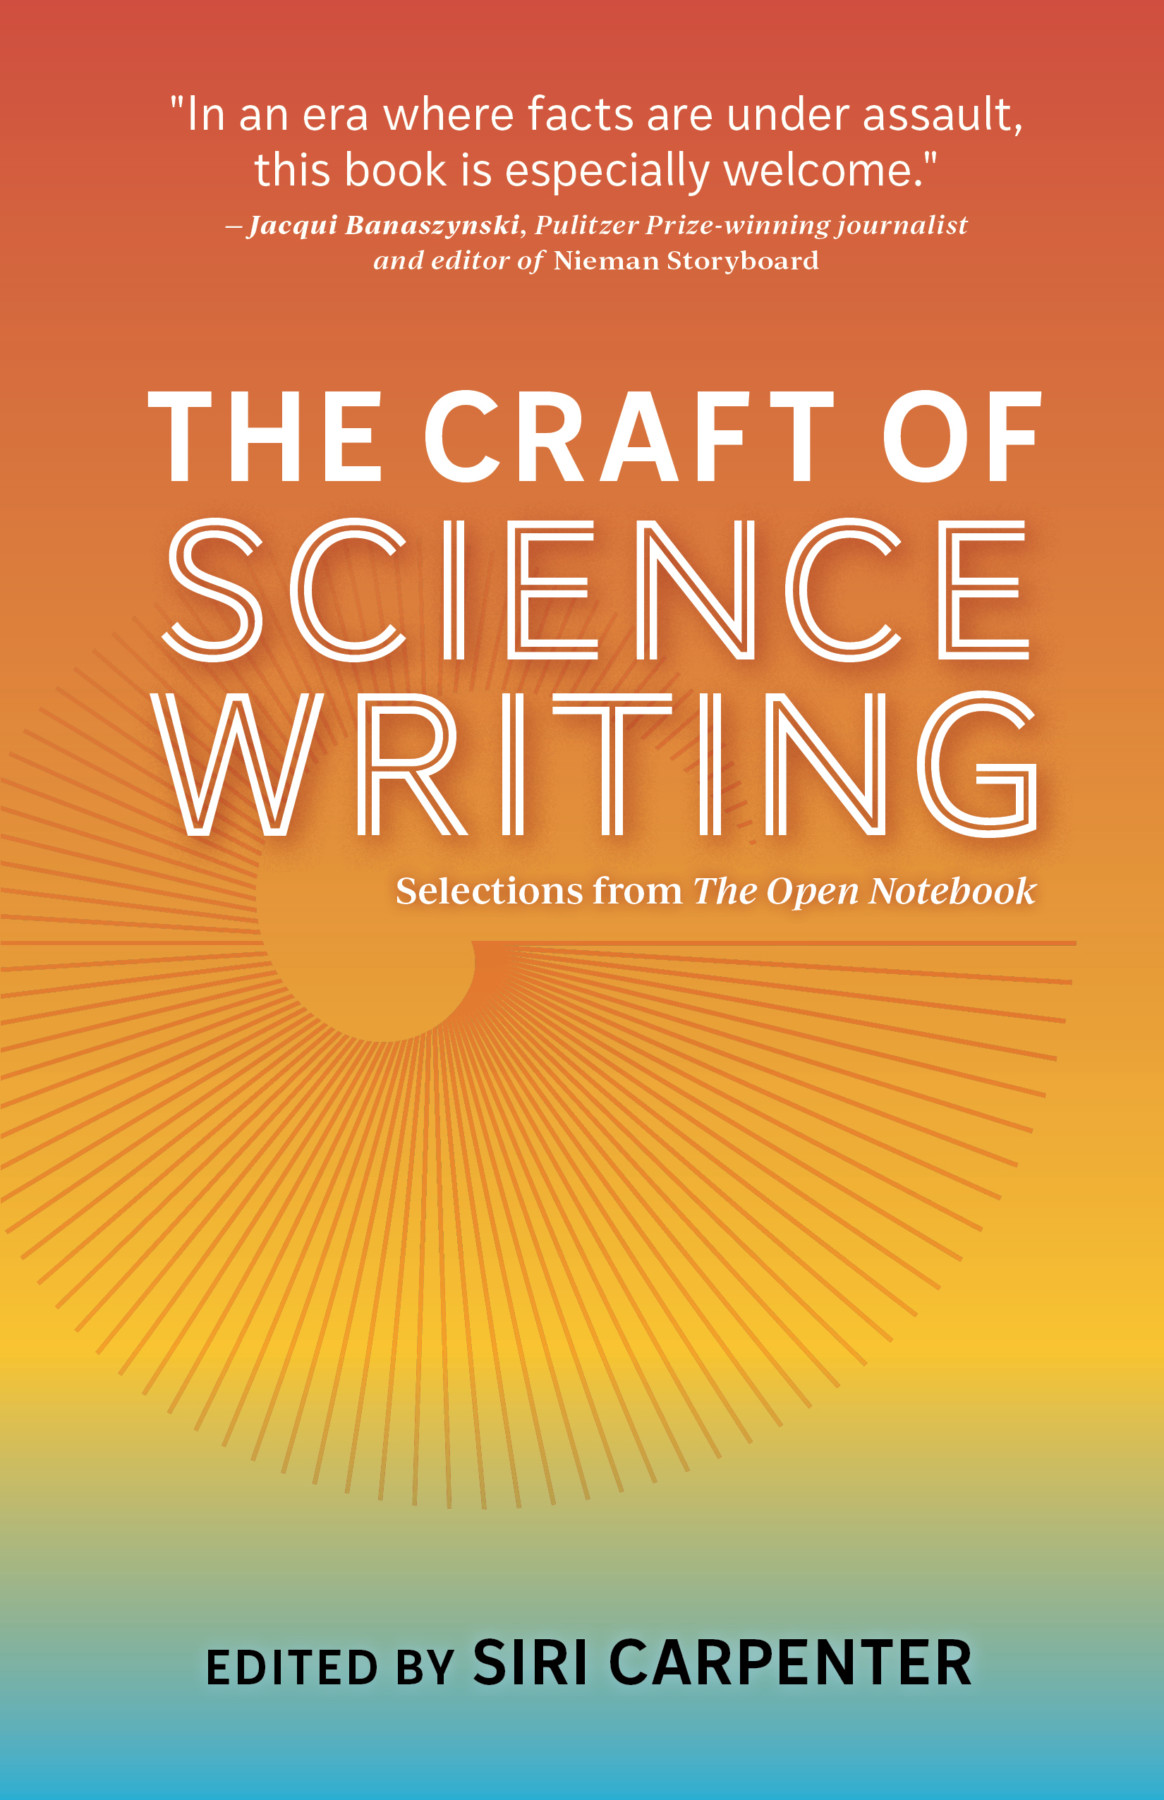 Cover of the Science Writers' Handbook